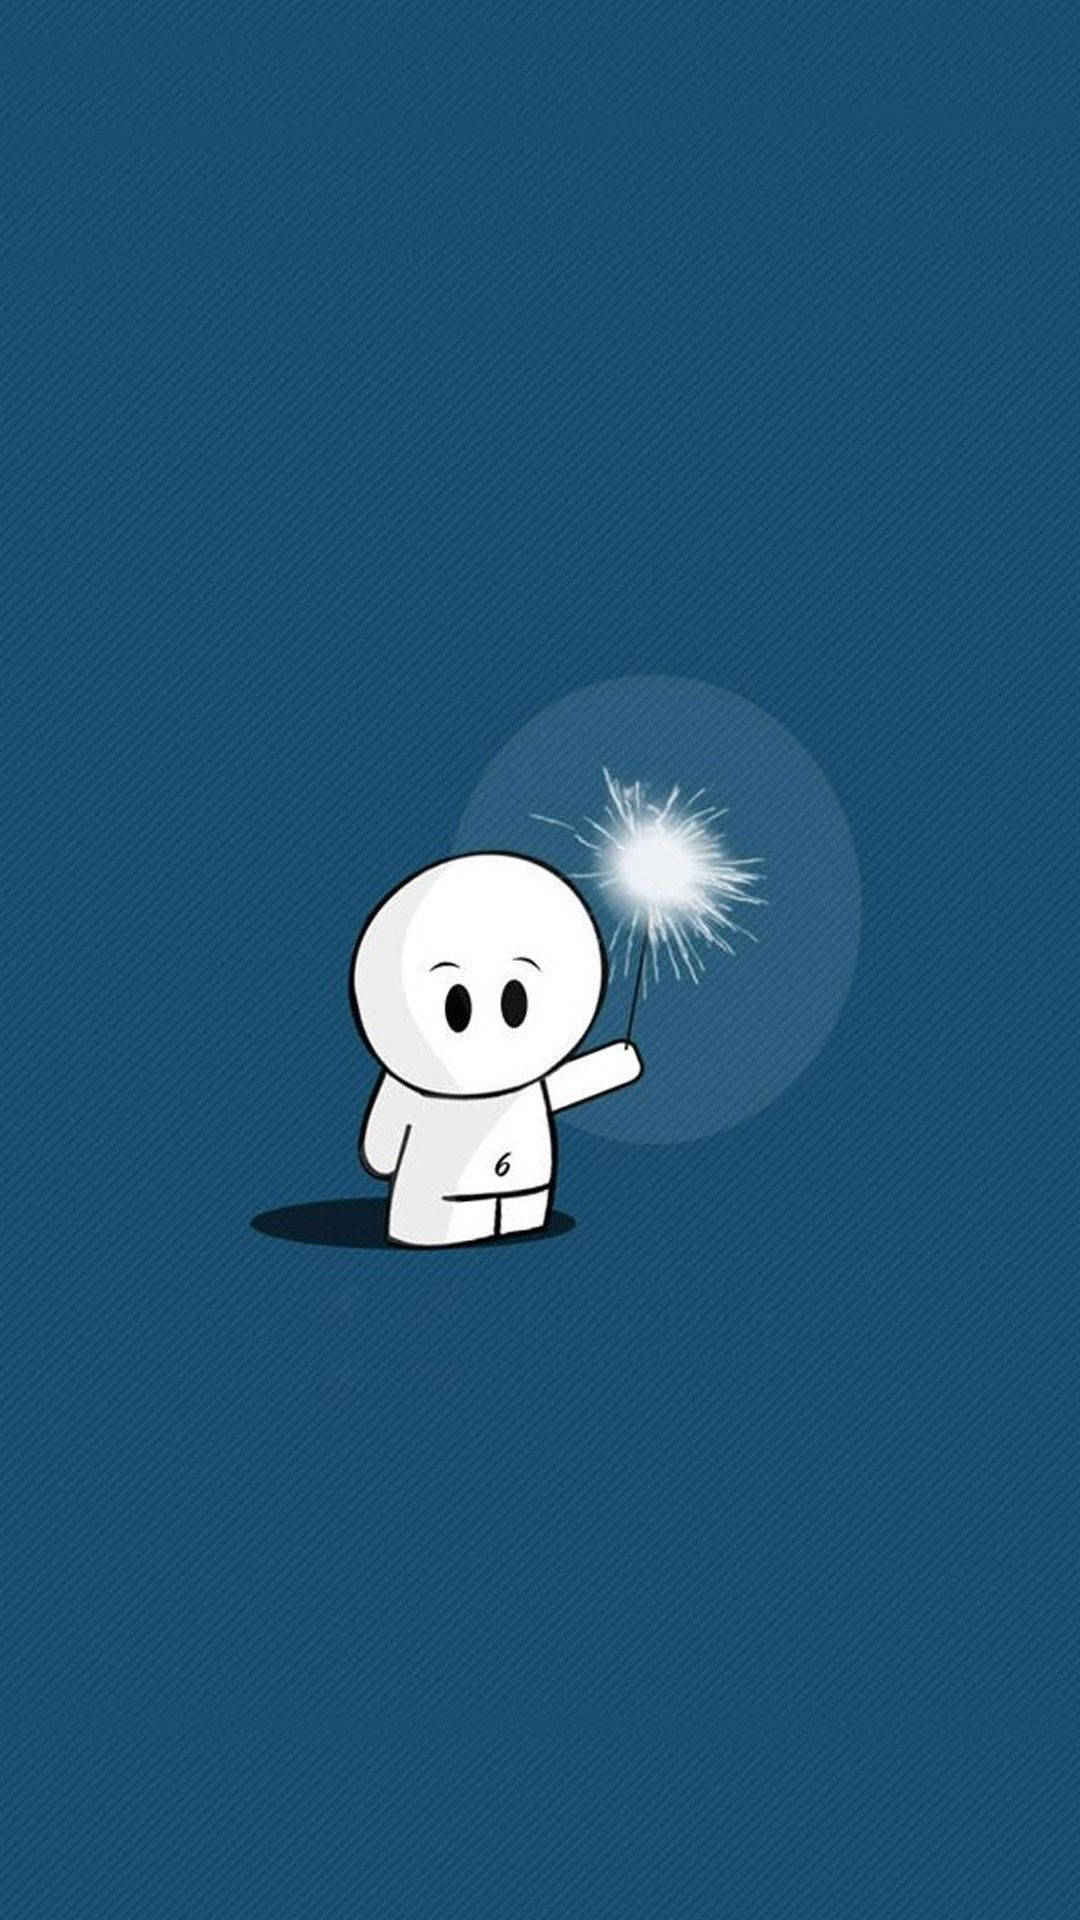 Iphone Animation White Doodle Fireworks Wallpaper